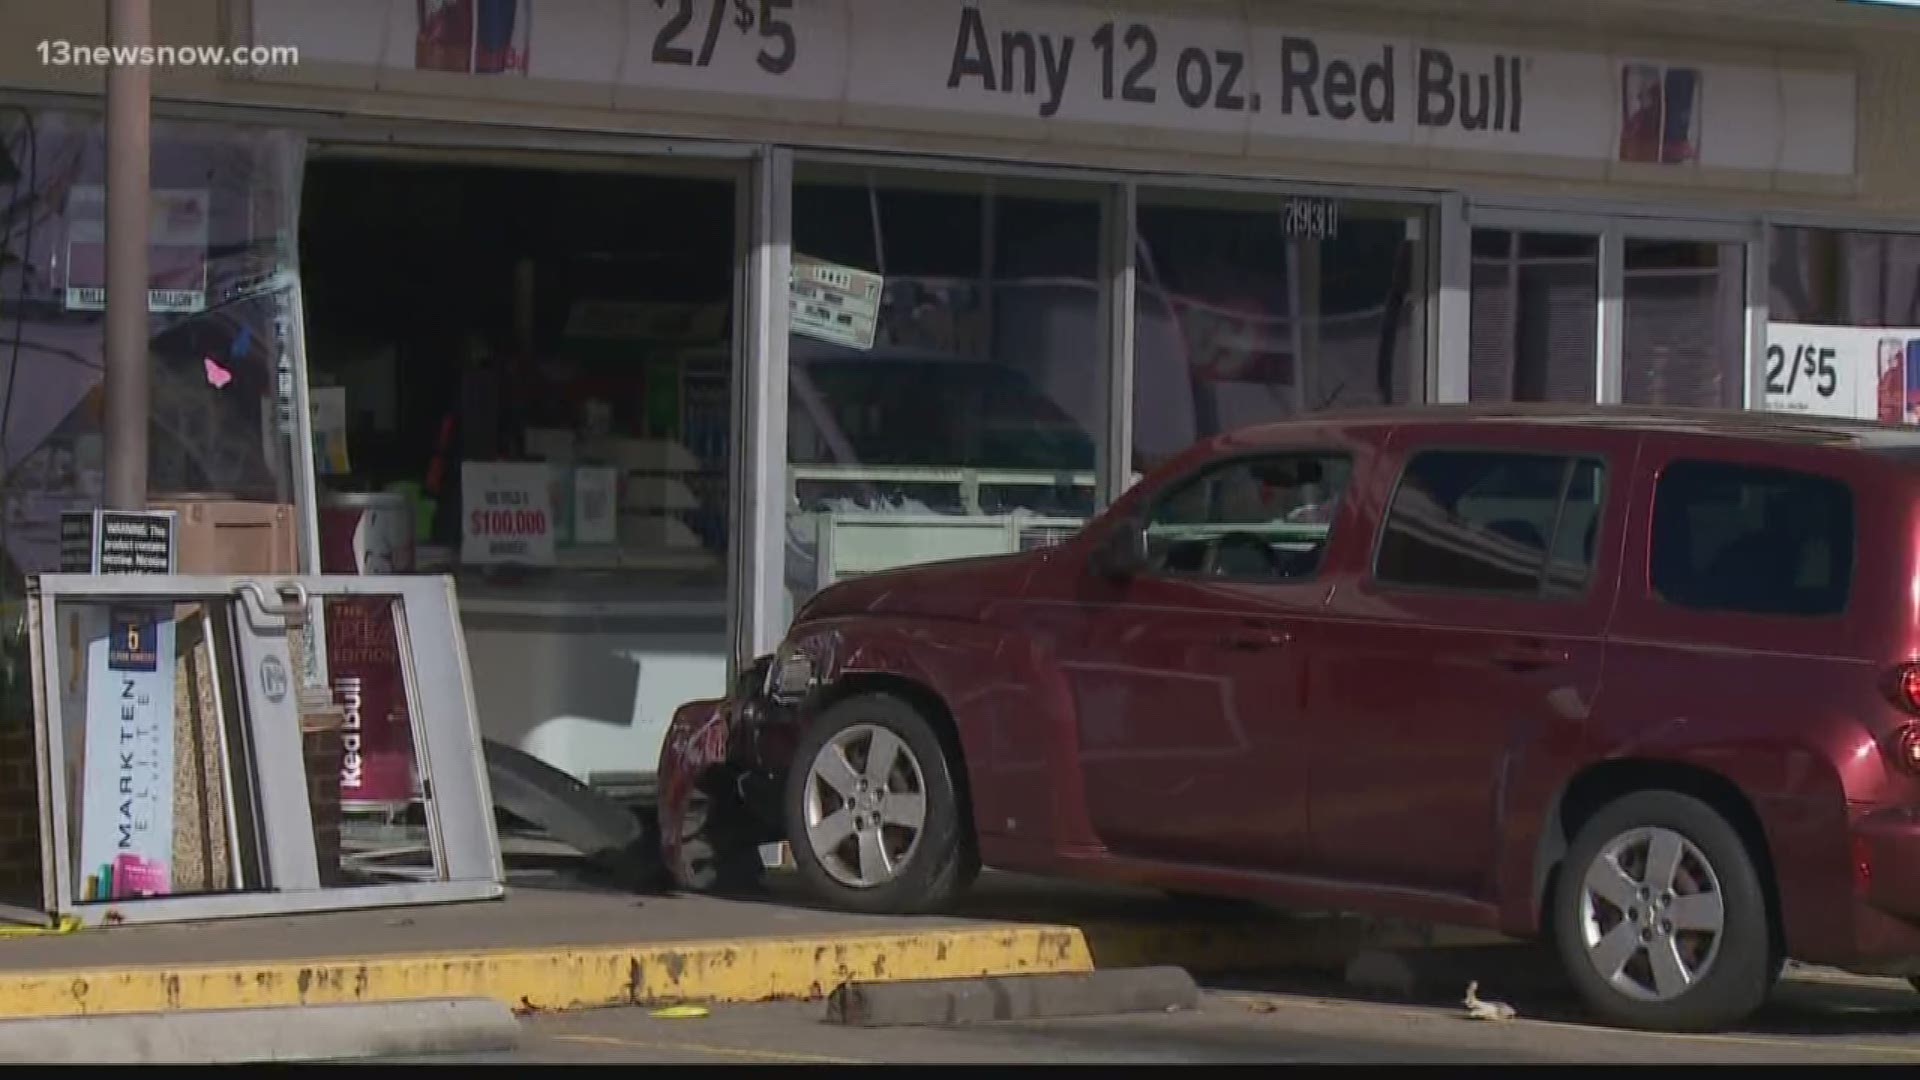 A 67-year-old drove their car into a 7-11 in Norfolk. The driver only suffered minor injuries.